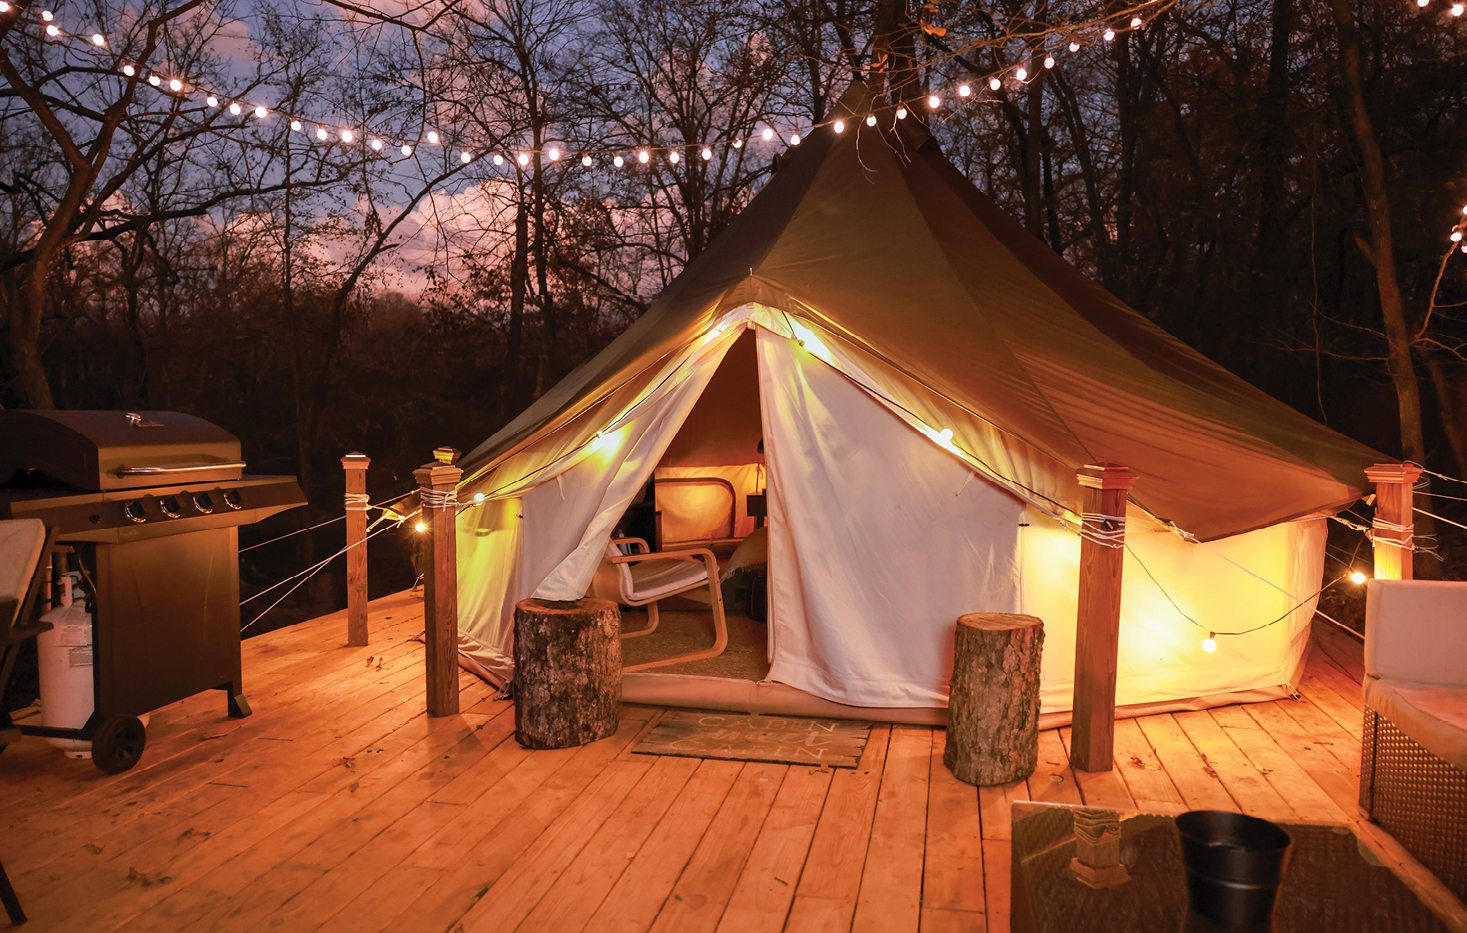 An outdoor glamping yurt on a wooden deck surrounded by fairy lights in the evening